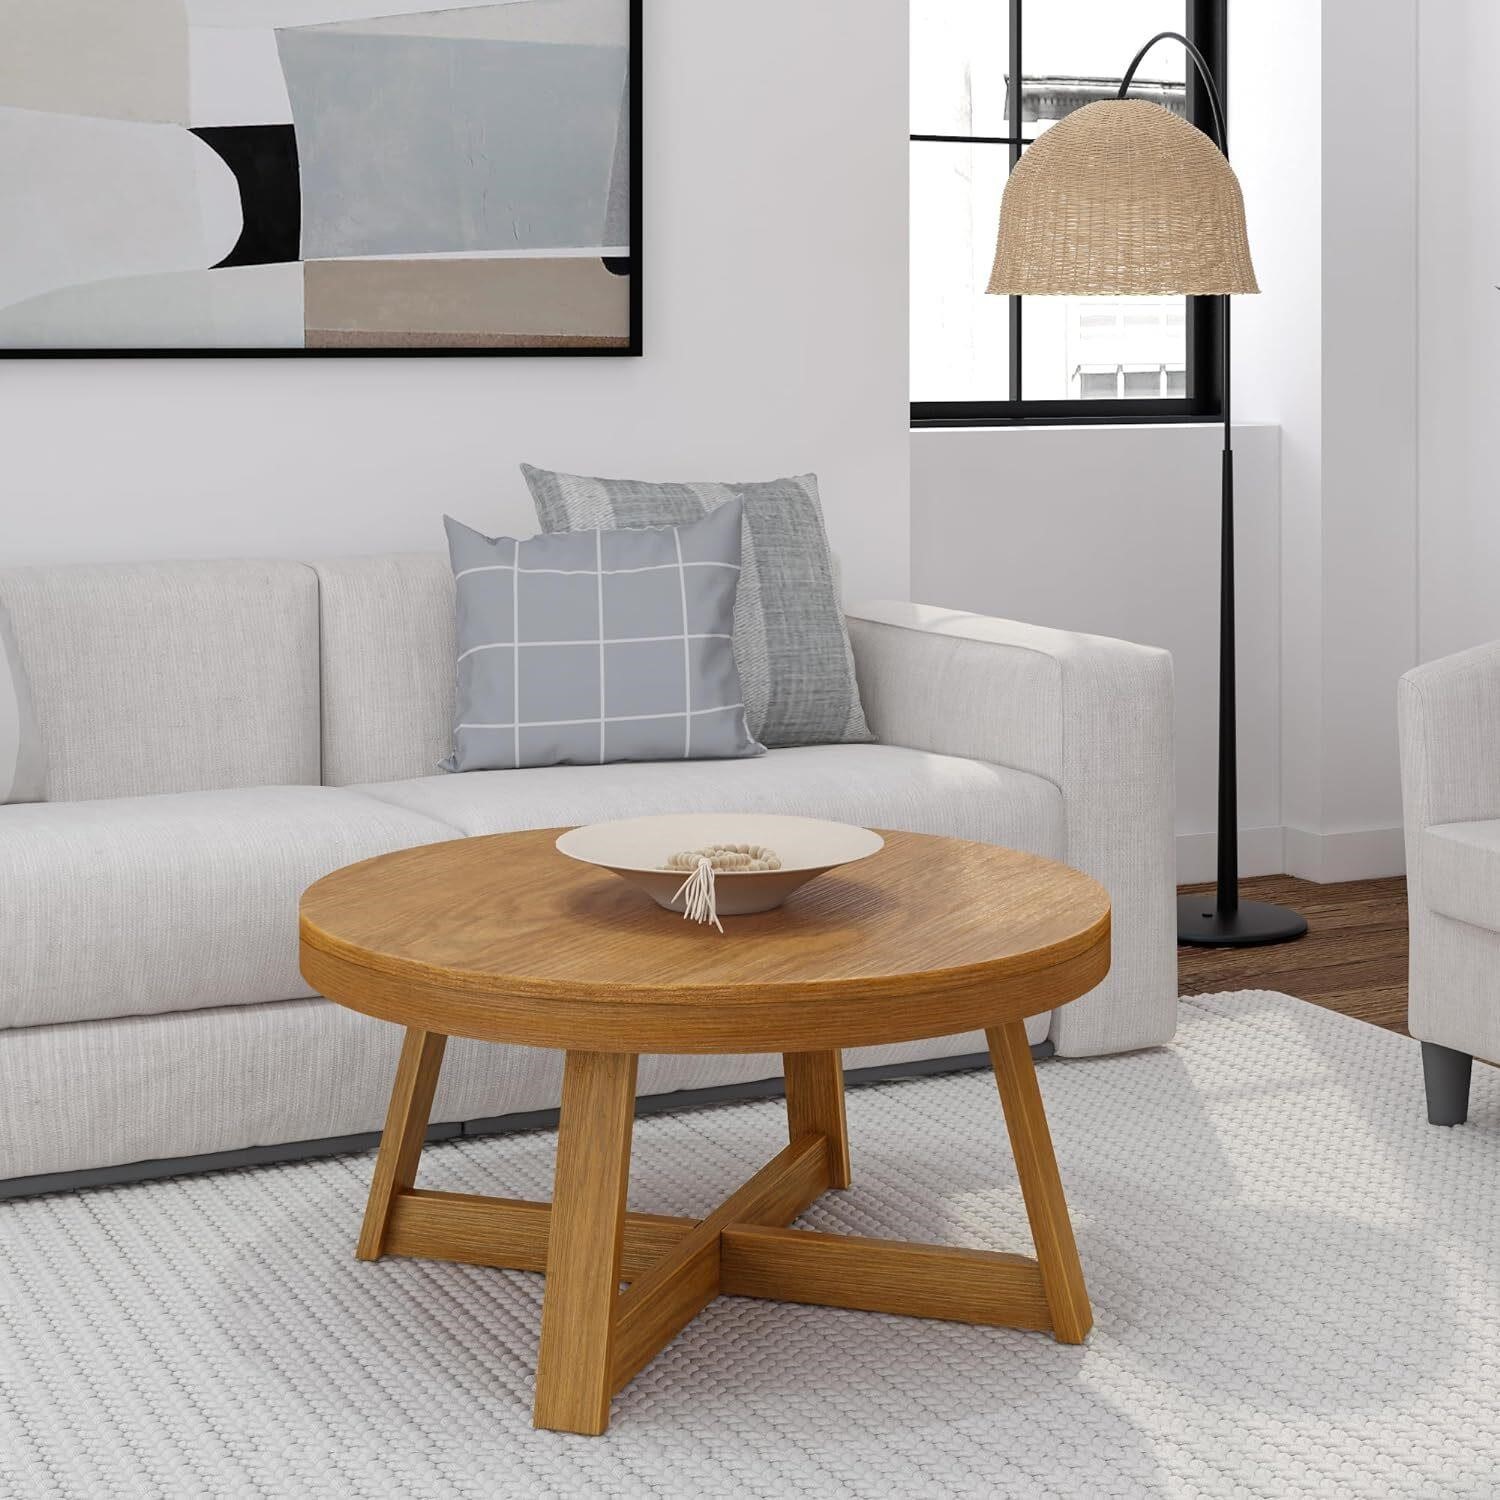 Plank+Beam Classic Round Coffee Table  36in